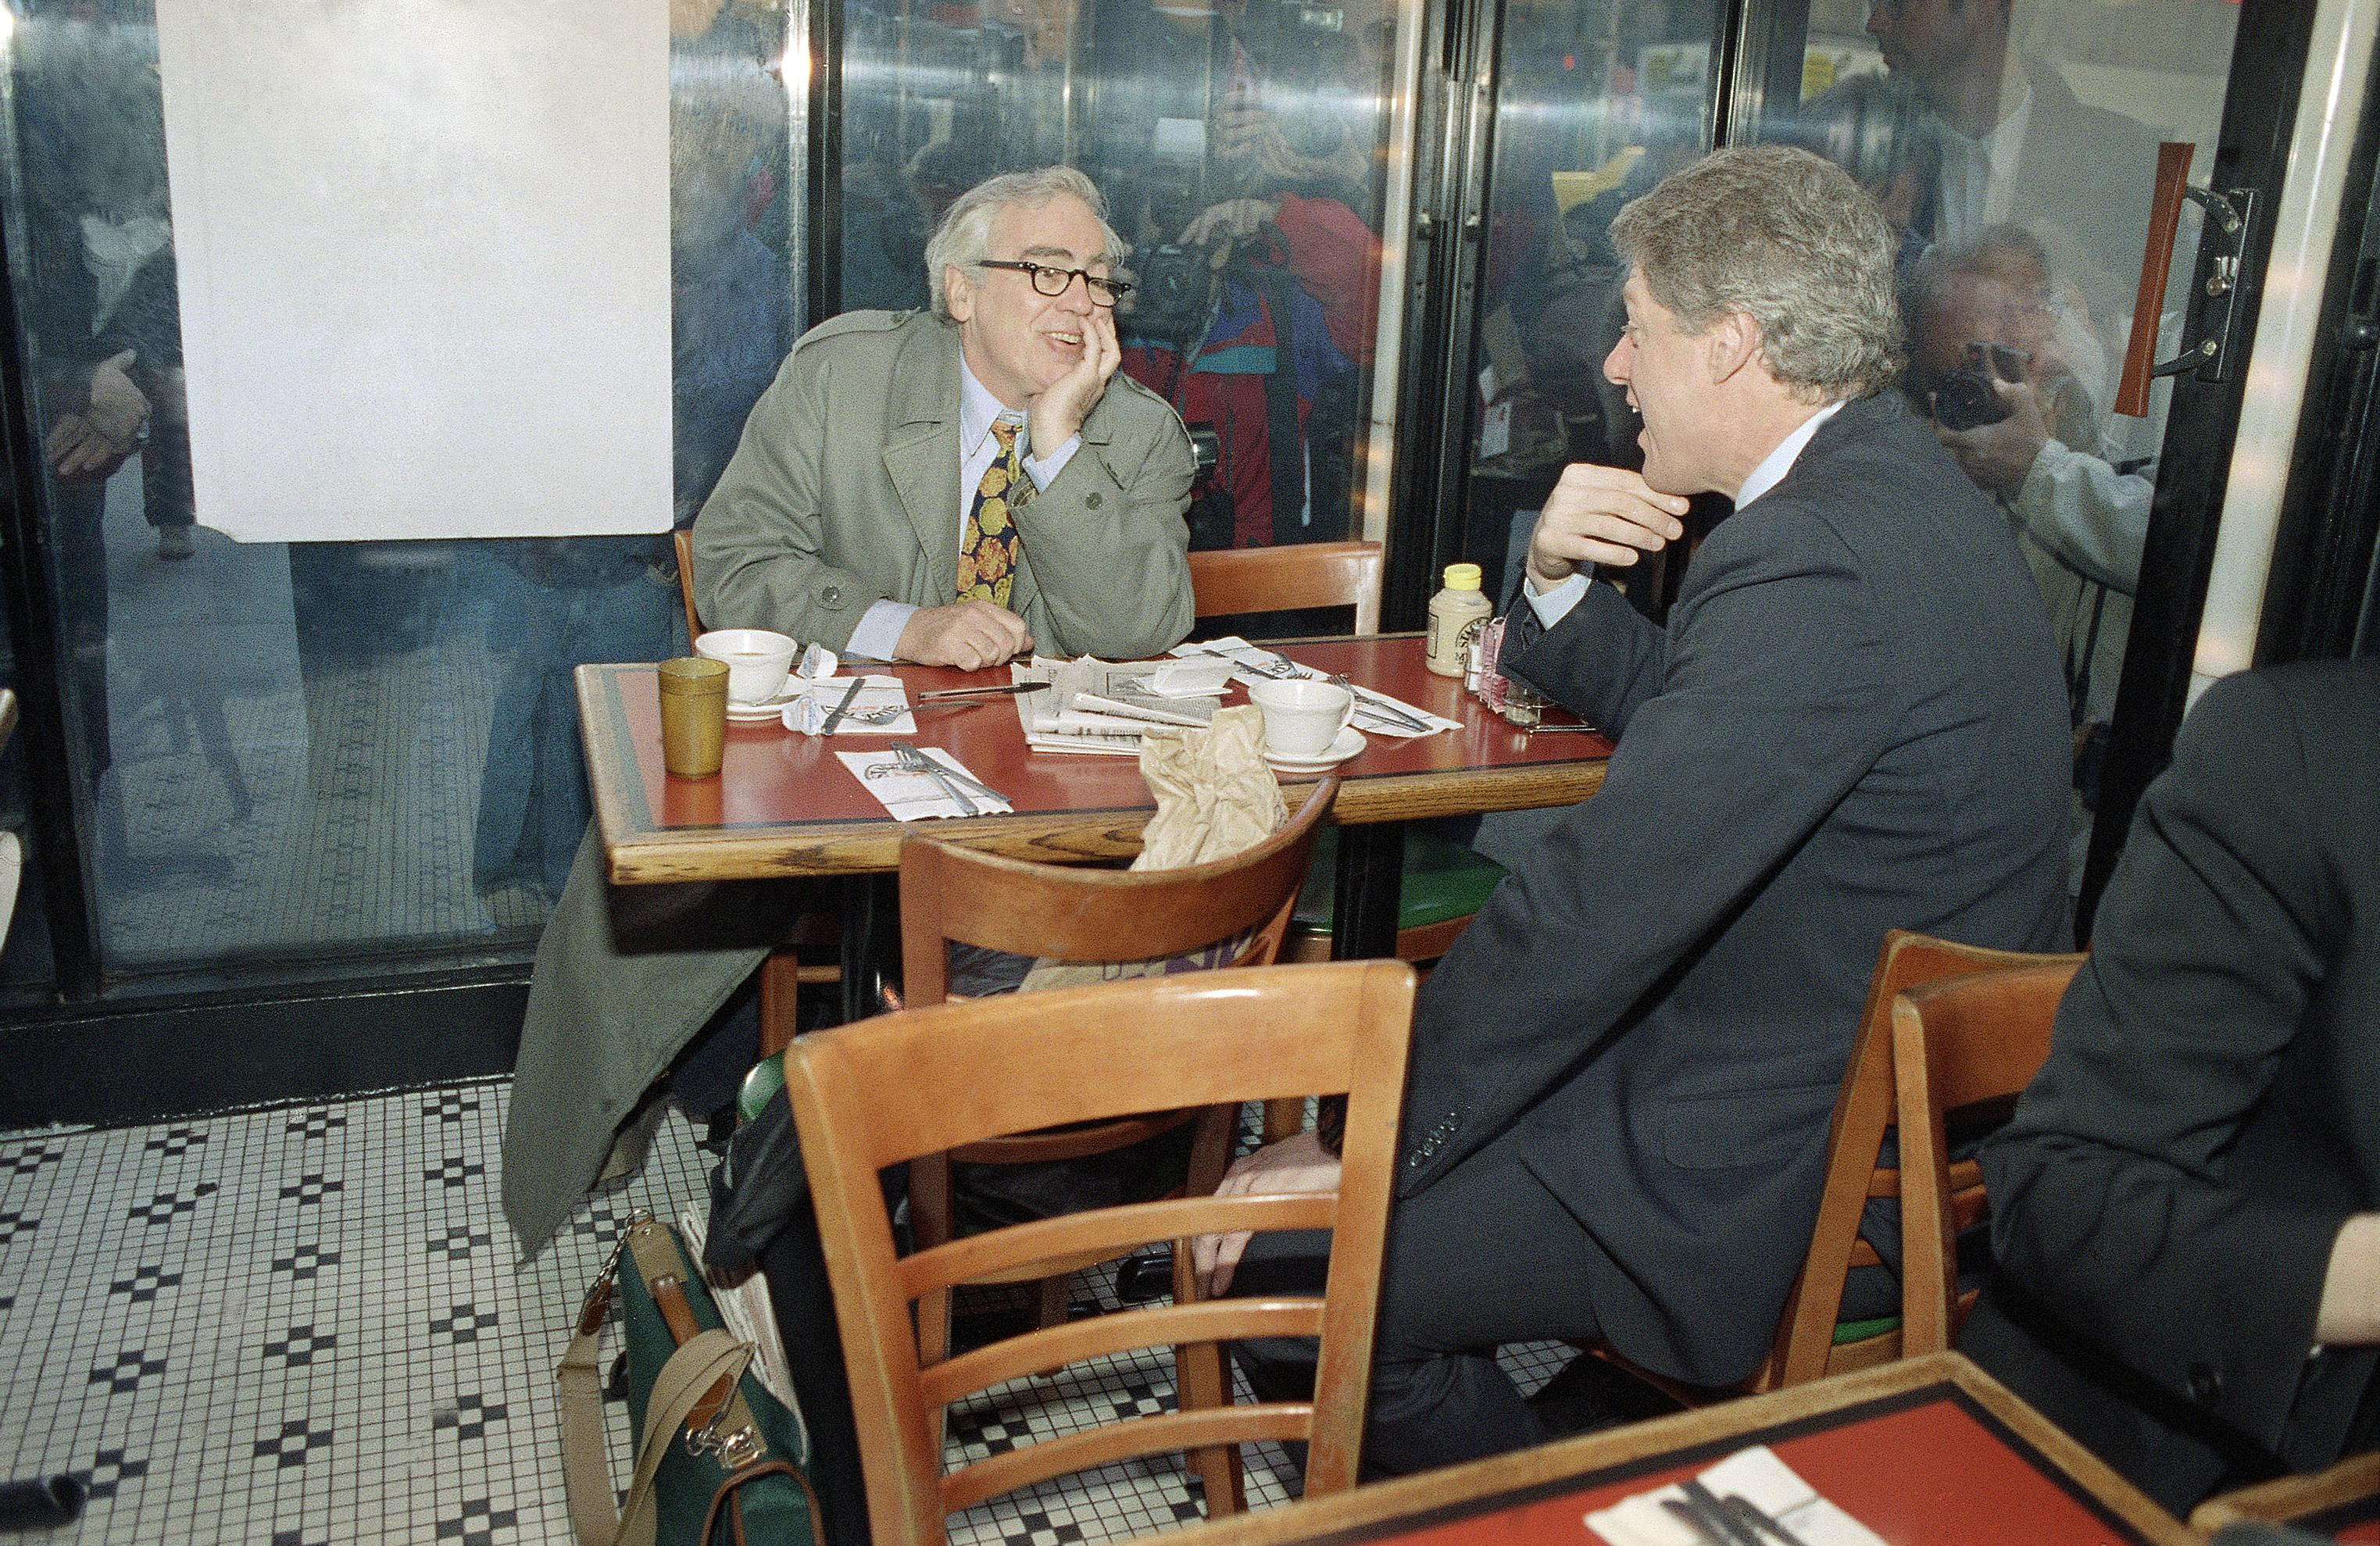 Then Democratic presidential hopeful Gov. Bill Clinton of Arkansas has a cup of coffee with newspaper columnist Jimmy Breslin at New York's Stage Deli, April 6, 1992. Stephan Savoia | Associated Press.